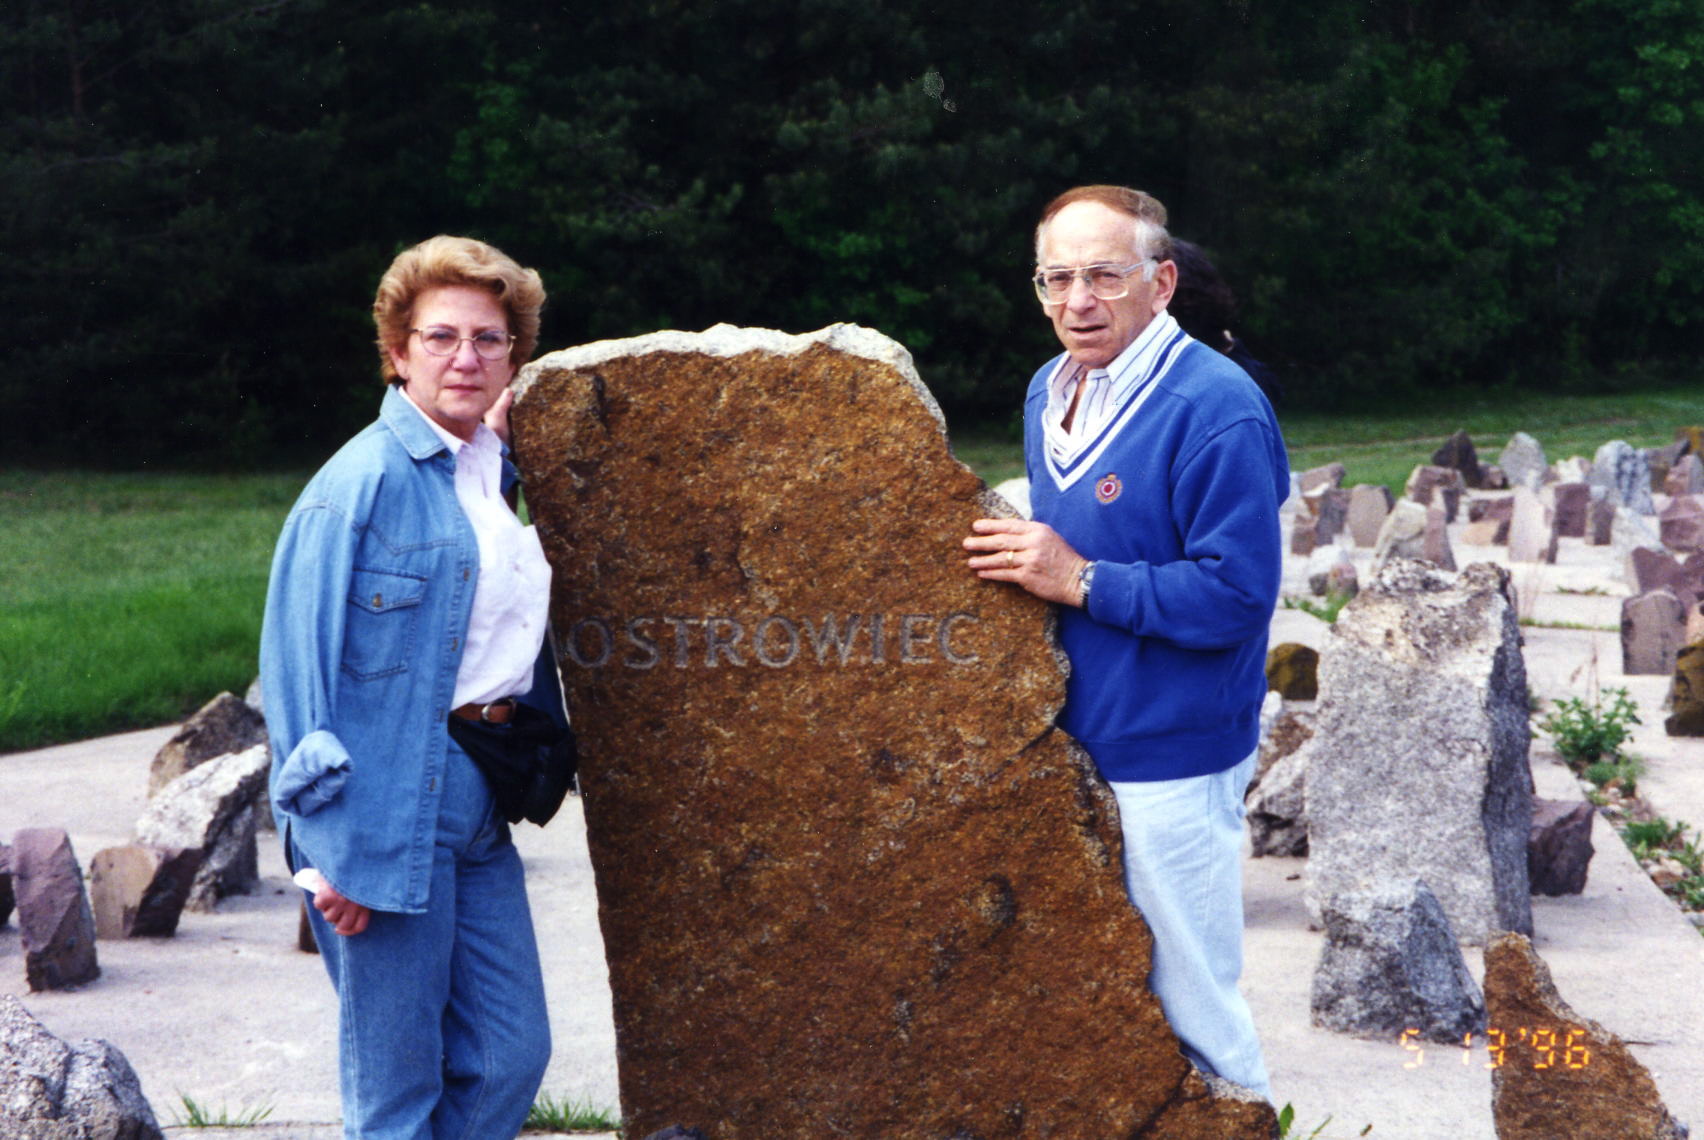 Ruth with her husband Mark visiting Treblinka in 1996